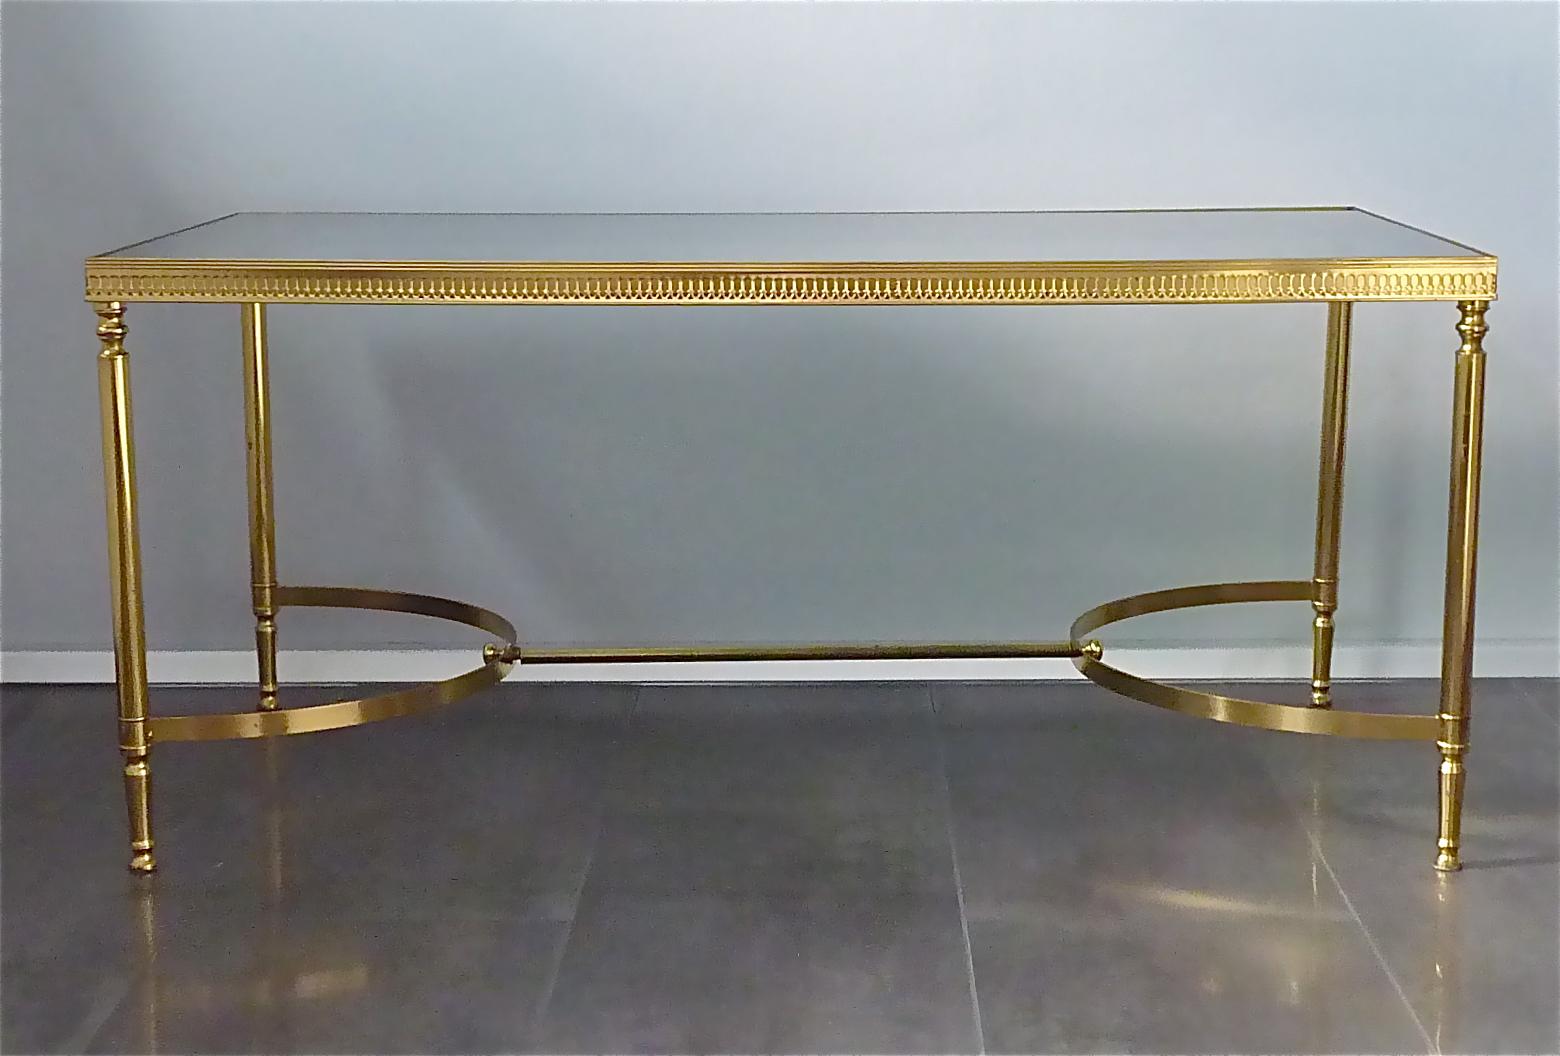 Patinated French Midcentury Maison Baguès Jansen Couch Sofa Table Brass Mirror Glass 1950s For Sale